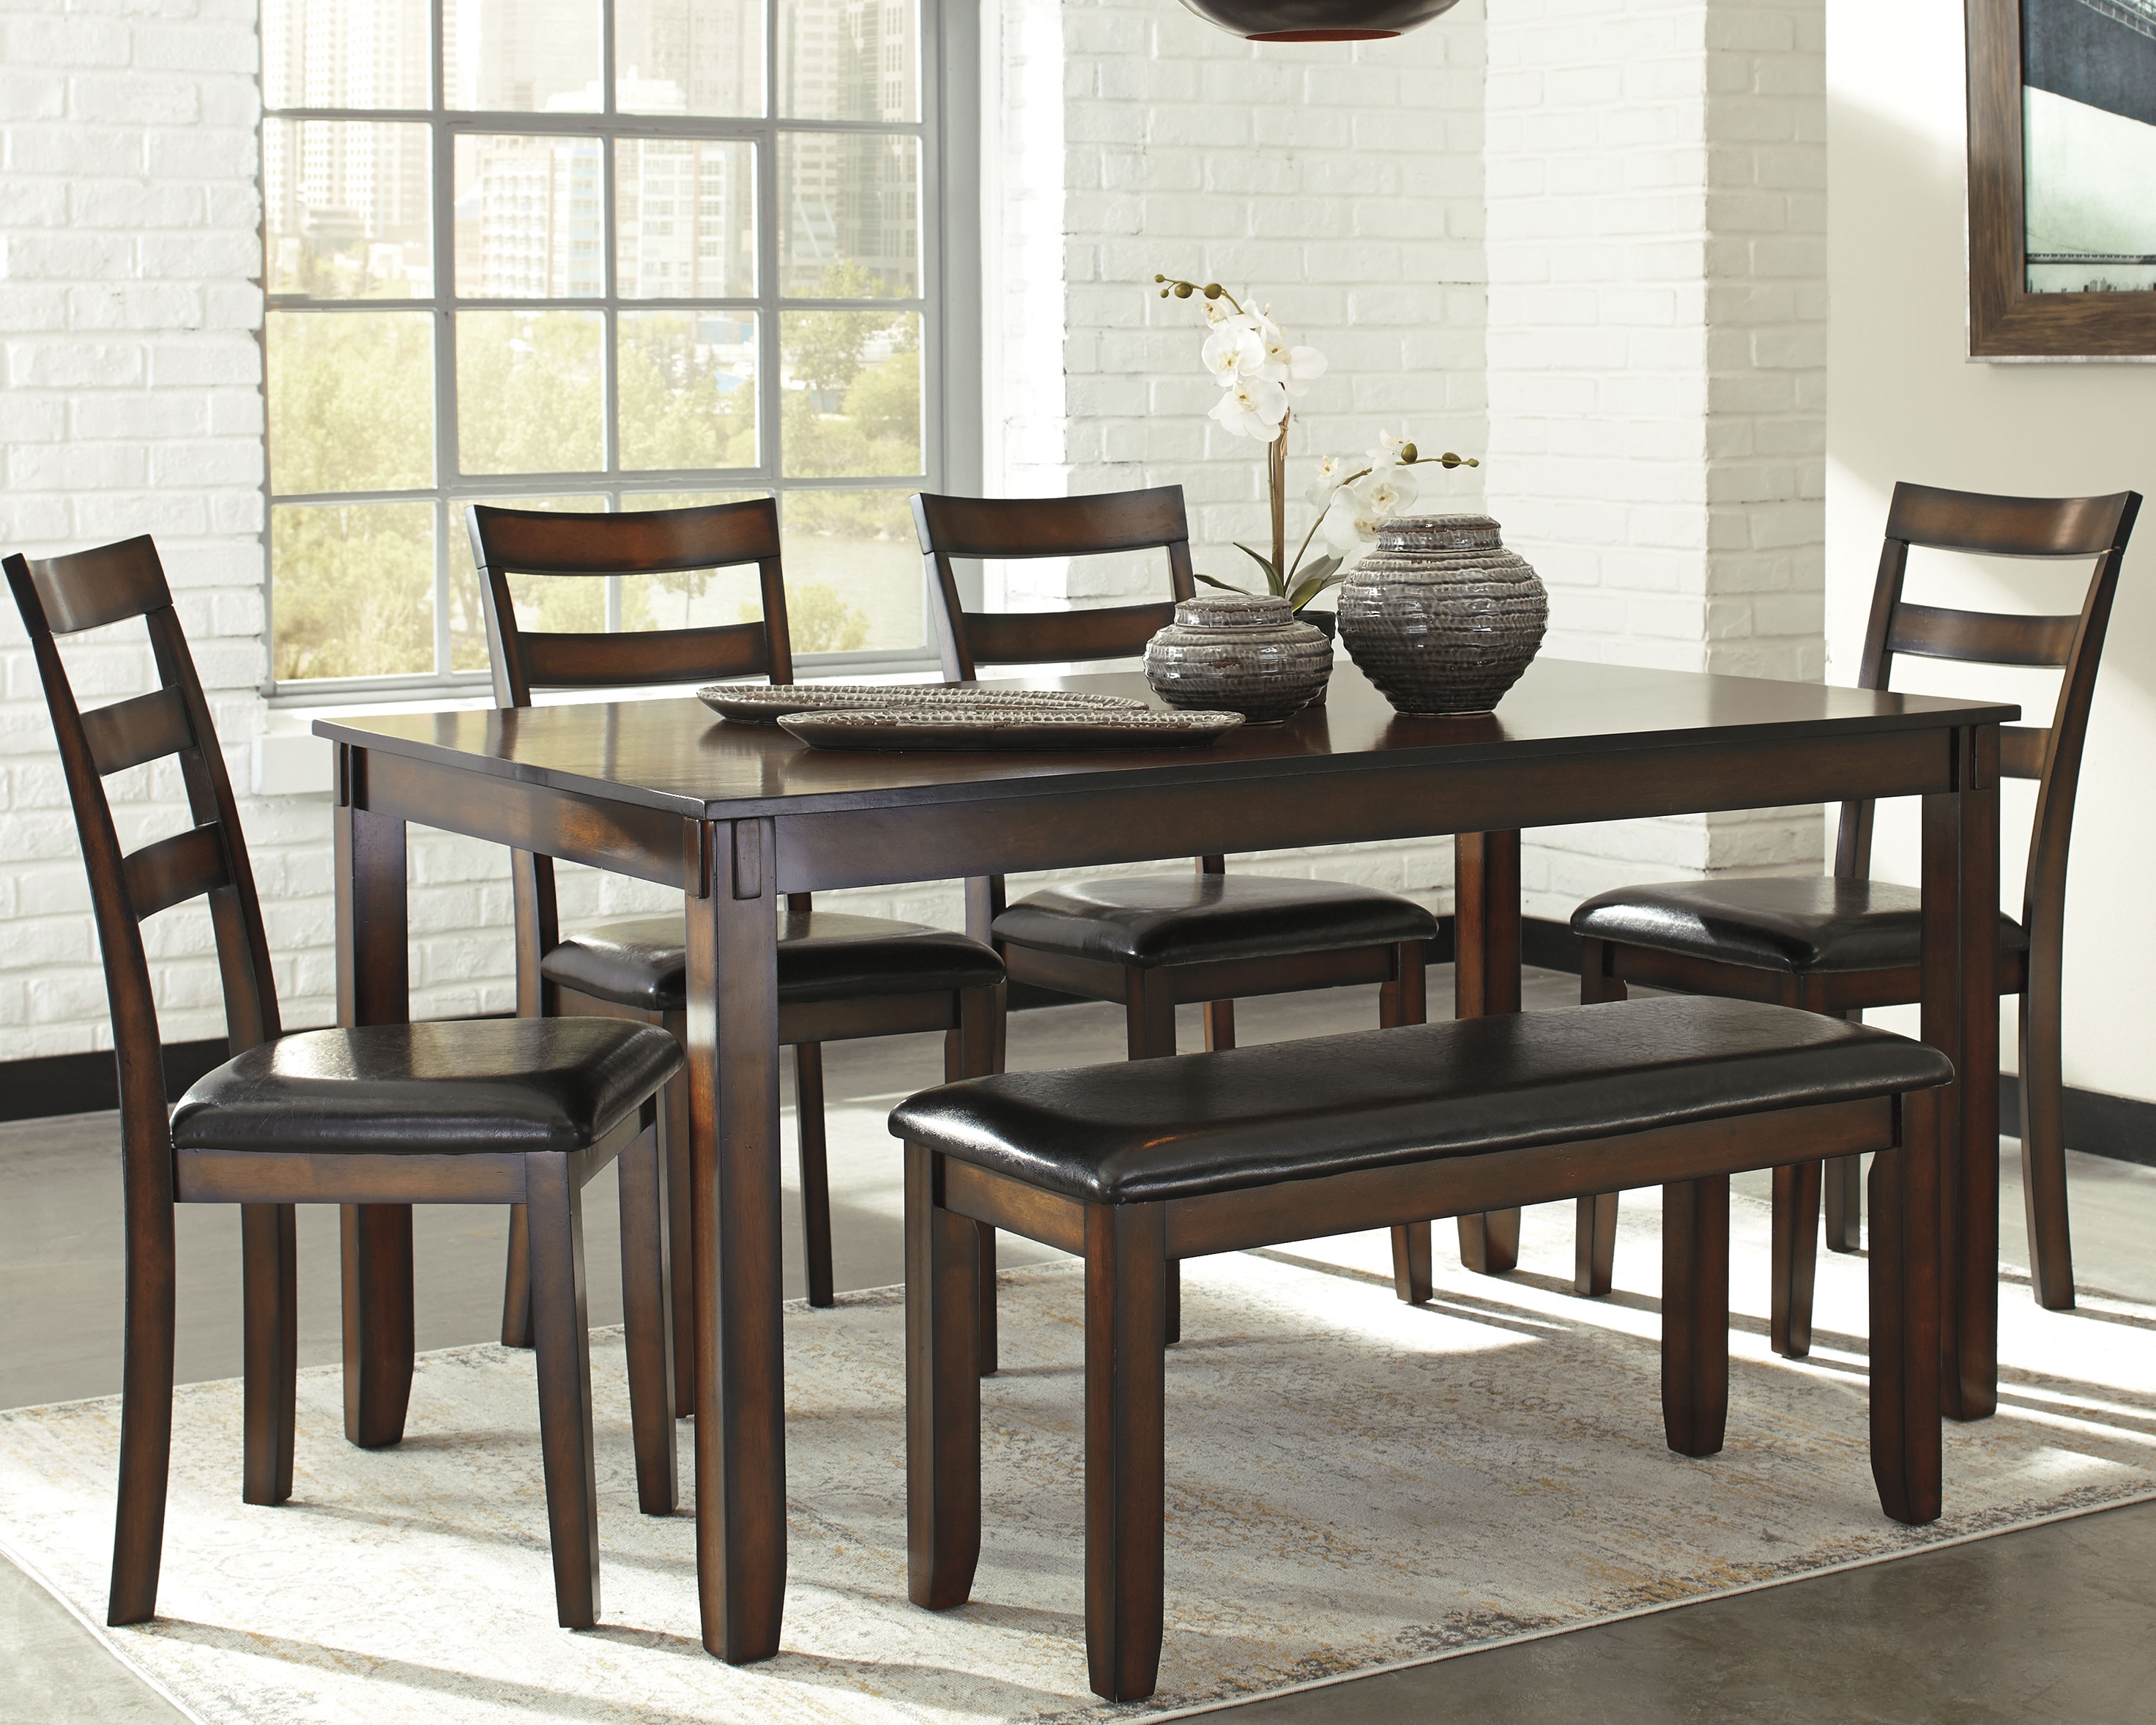 Coviar Dining Room Table and Chairs with Bench (Set of 6